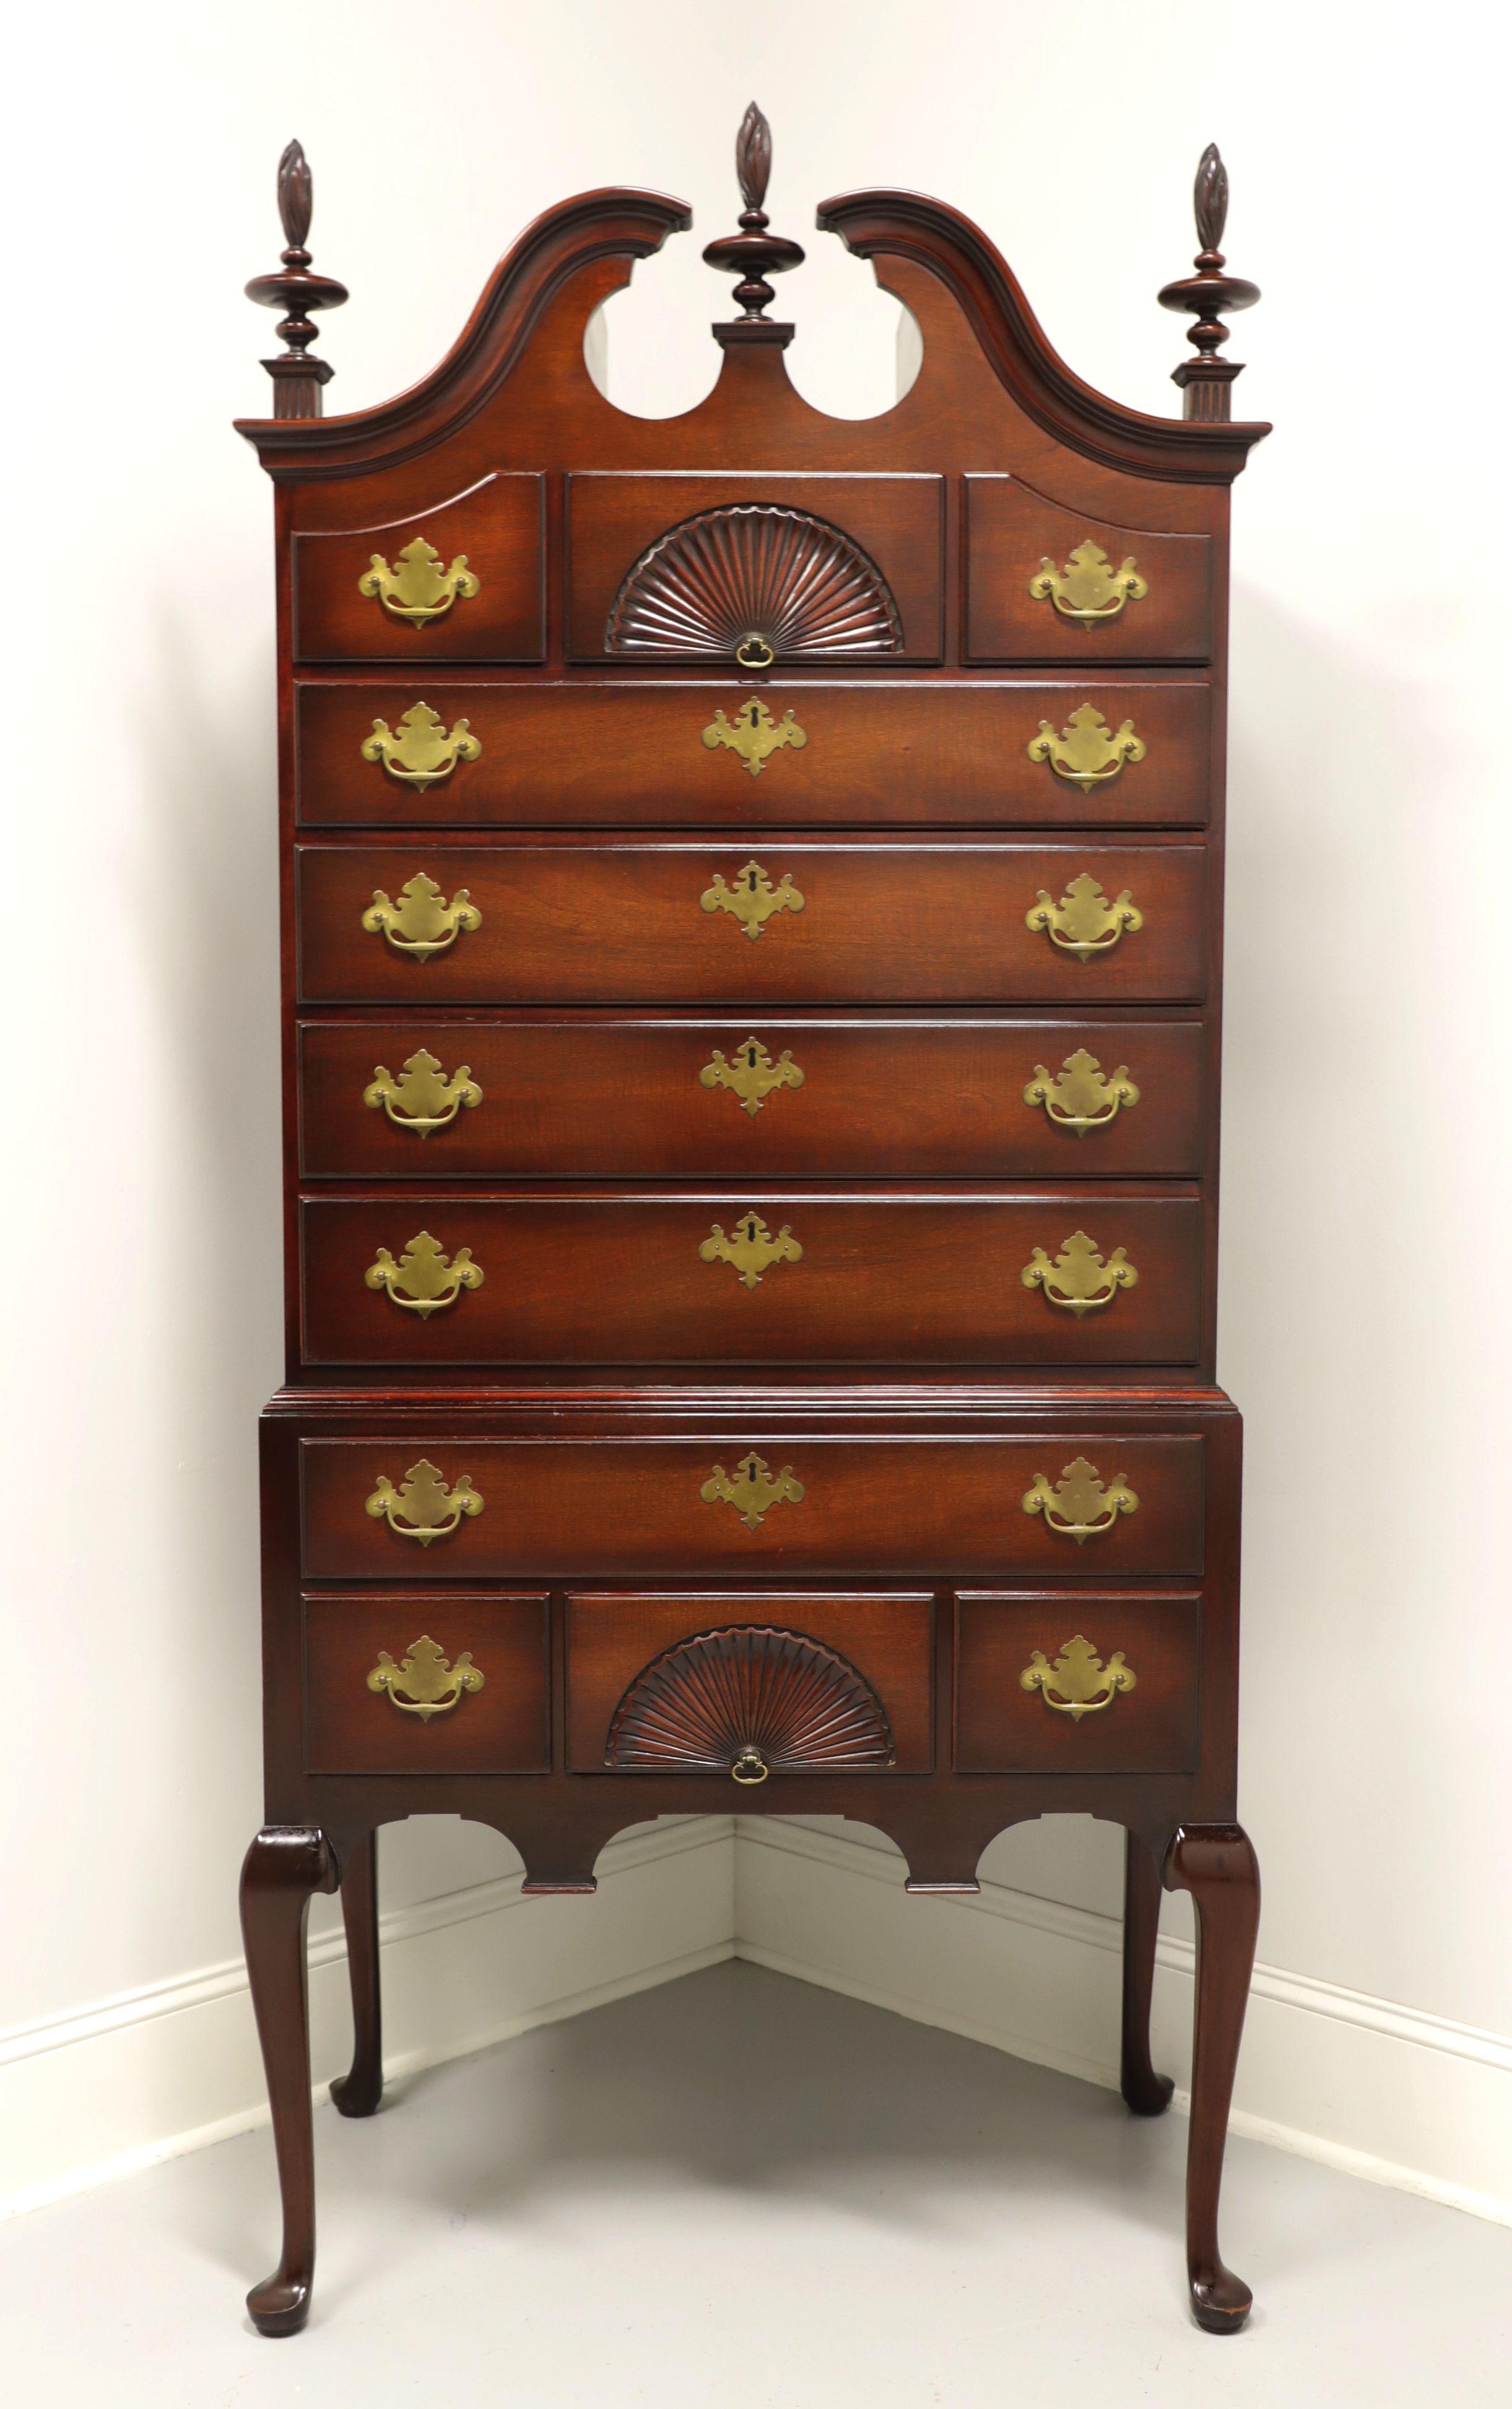 A Queen Anne style highboy chest by Kindel Furniture, of Grand Rapids, Michigan, USA. Solid mahogany with brass hardware; complimented by broken bonnet top, flame form finials, fan carvings, carved apron, and raised on tall cabriole legs with pad